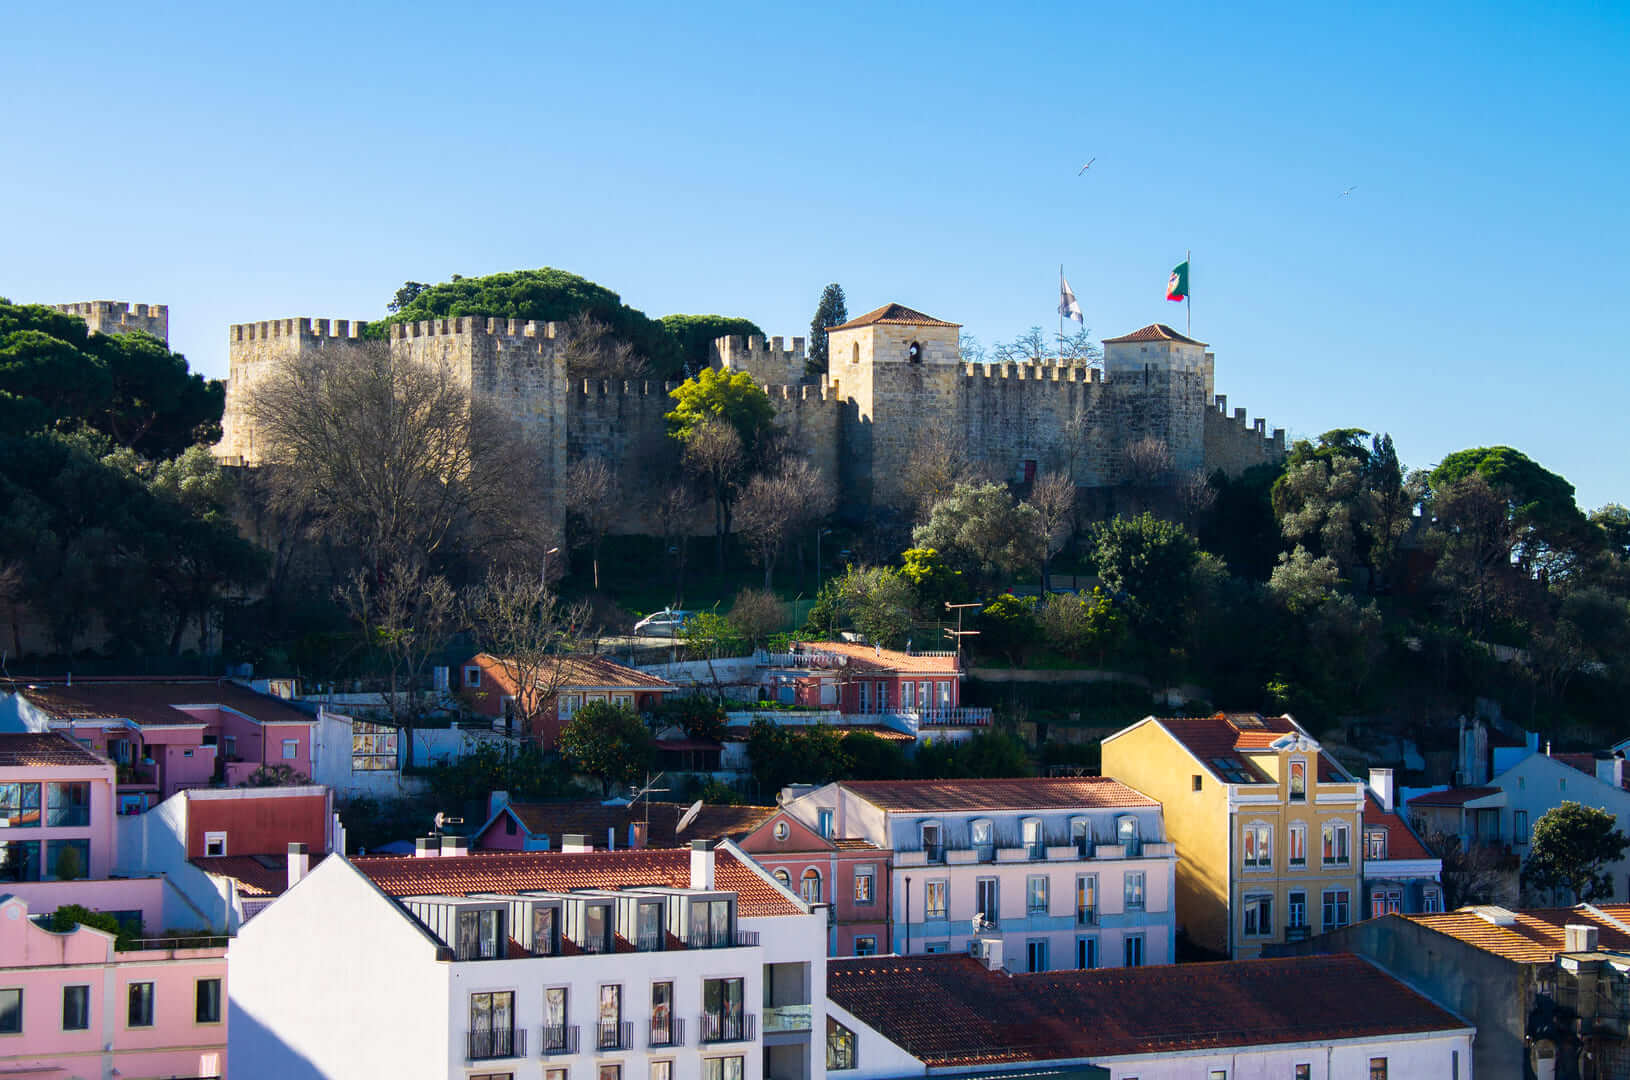 A view across the colourful buildings, rooftops and gardens of Lisbon, Portugal, towards the imposing Castelo de S. Jorge (St George Castle) on a sunny day.
